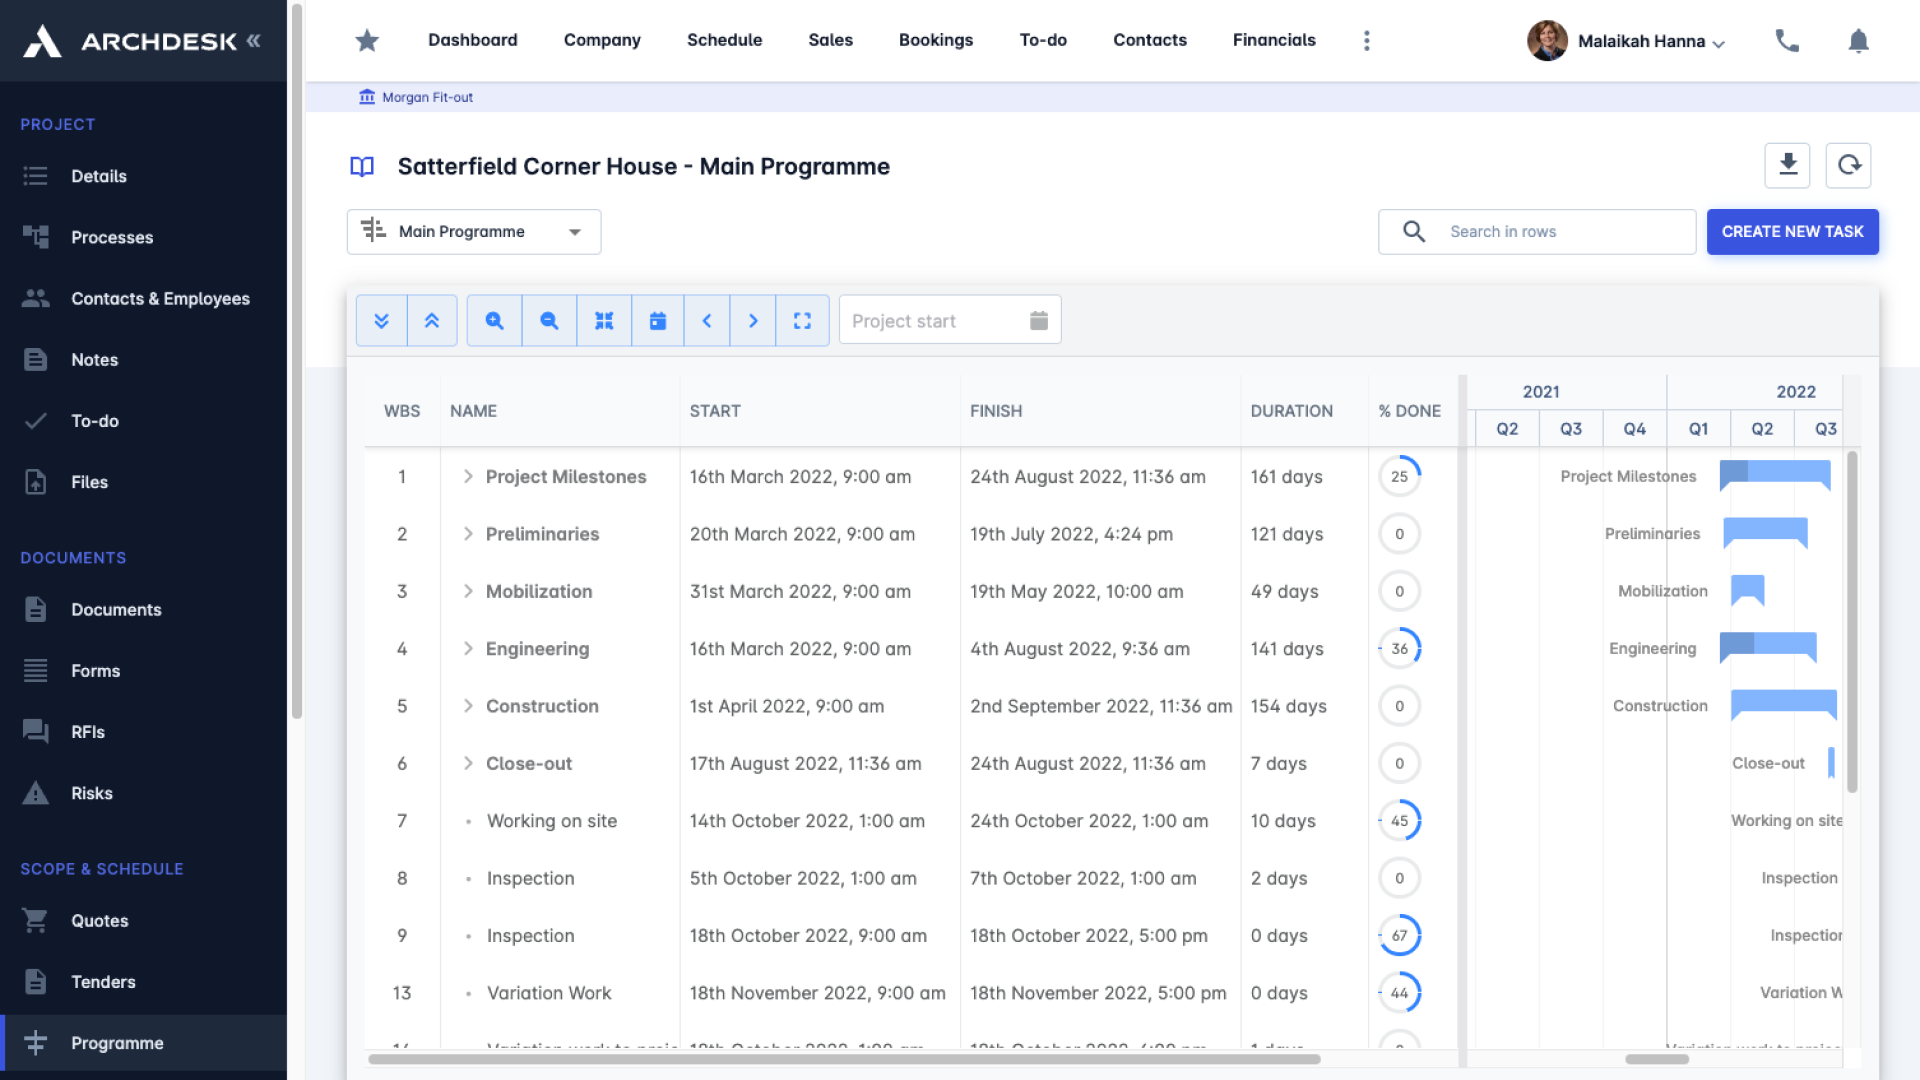 Create a well planned programme of works for your projects, manage scheduled construction tasks, resources, responsibilities, tasks, and more. Use the Gantt chart view to see your projects outview, ensuring optimisation of resources, time, and costs.